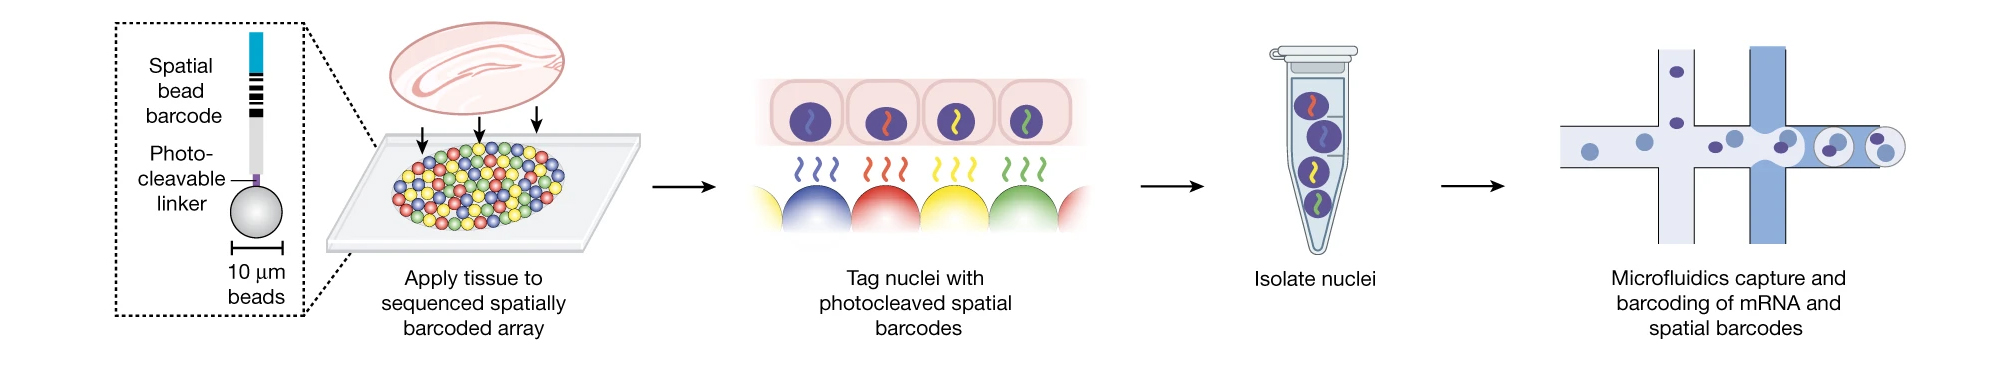 Schematic of Slide-tags. A 20-μm fresh-frozen tissue section is applied to a monolayer of randomly deposited, DNA-barcoded beads that have been spatially indexed. These DNA spatial barcodes are photocleaved and associate with nuclei. Spatially barcoded nuclei are then profiled using established droplet-based single-nucleus sequencing technologies. The diagram was created using BioRender.